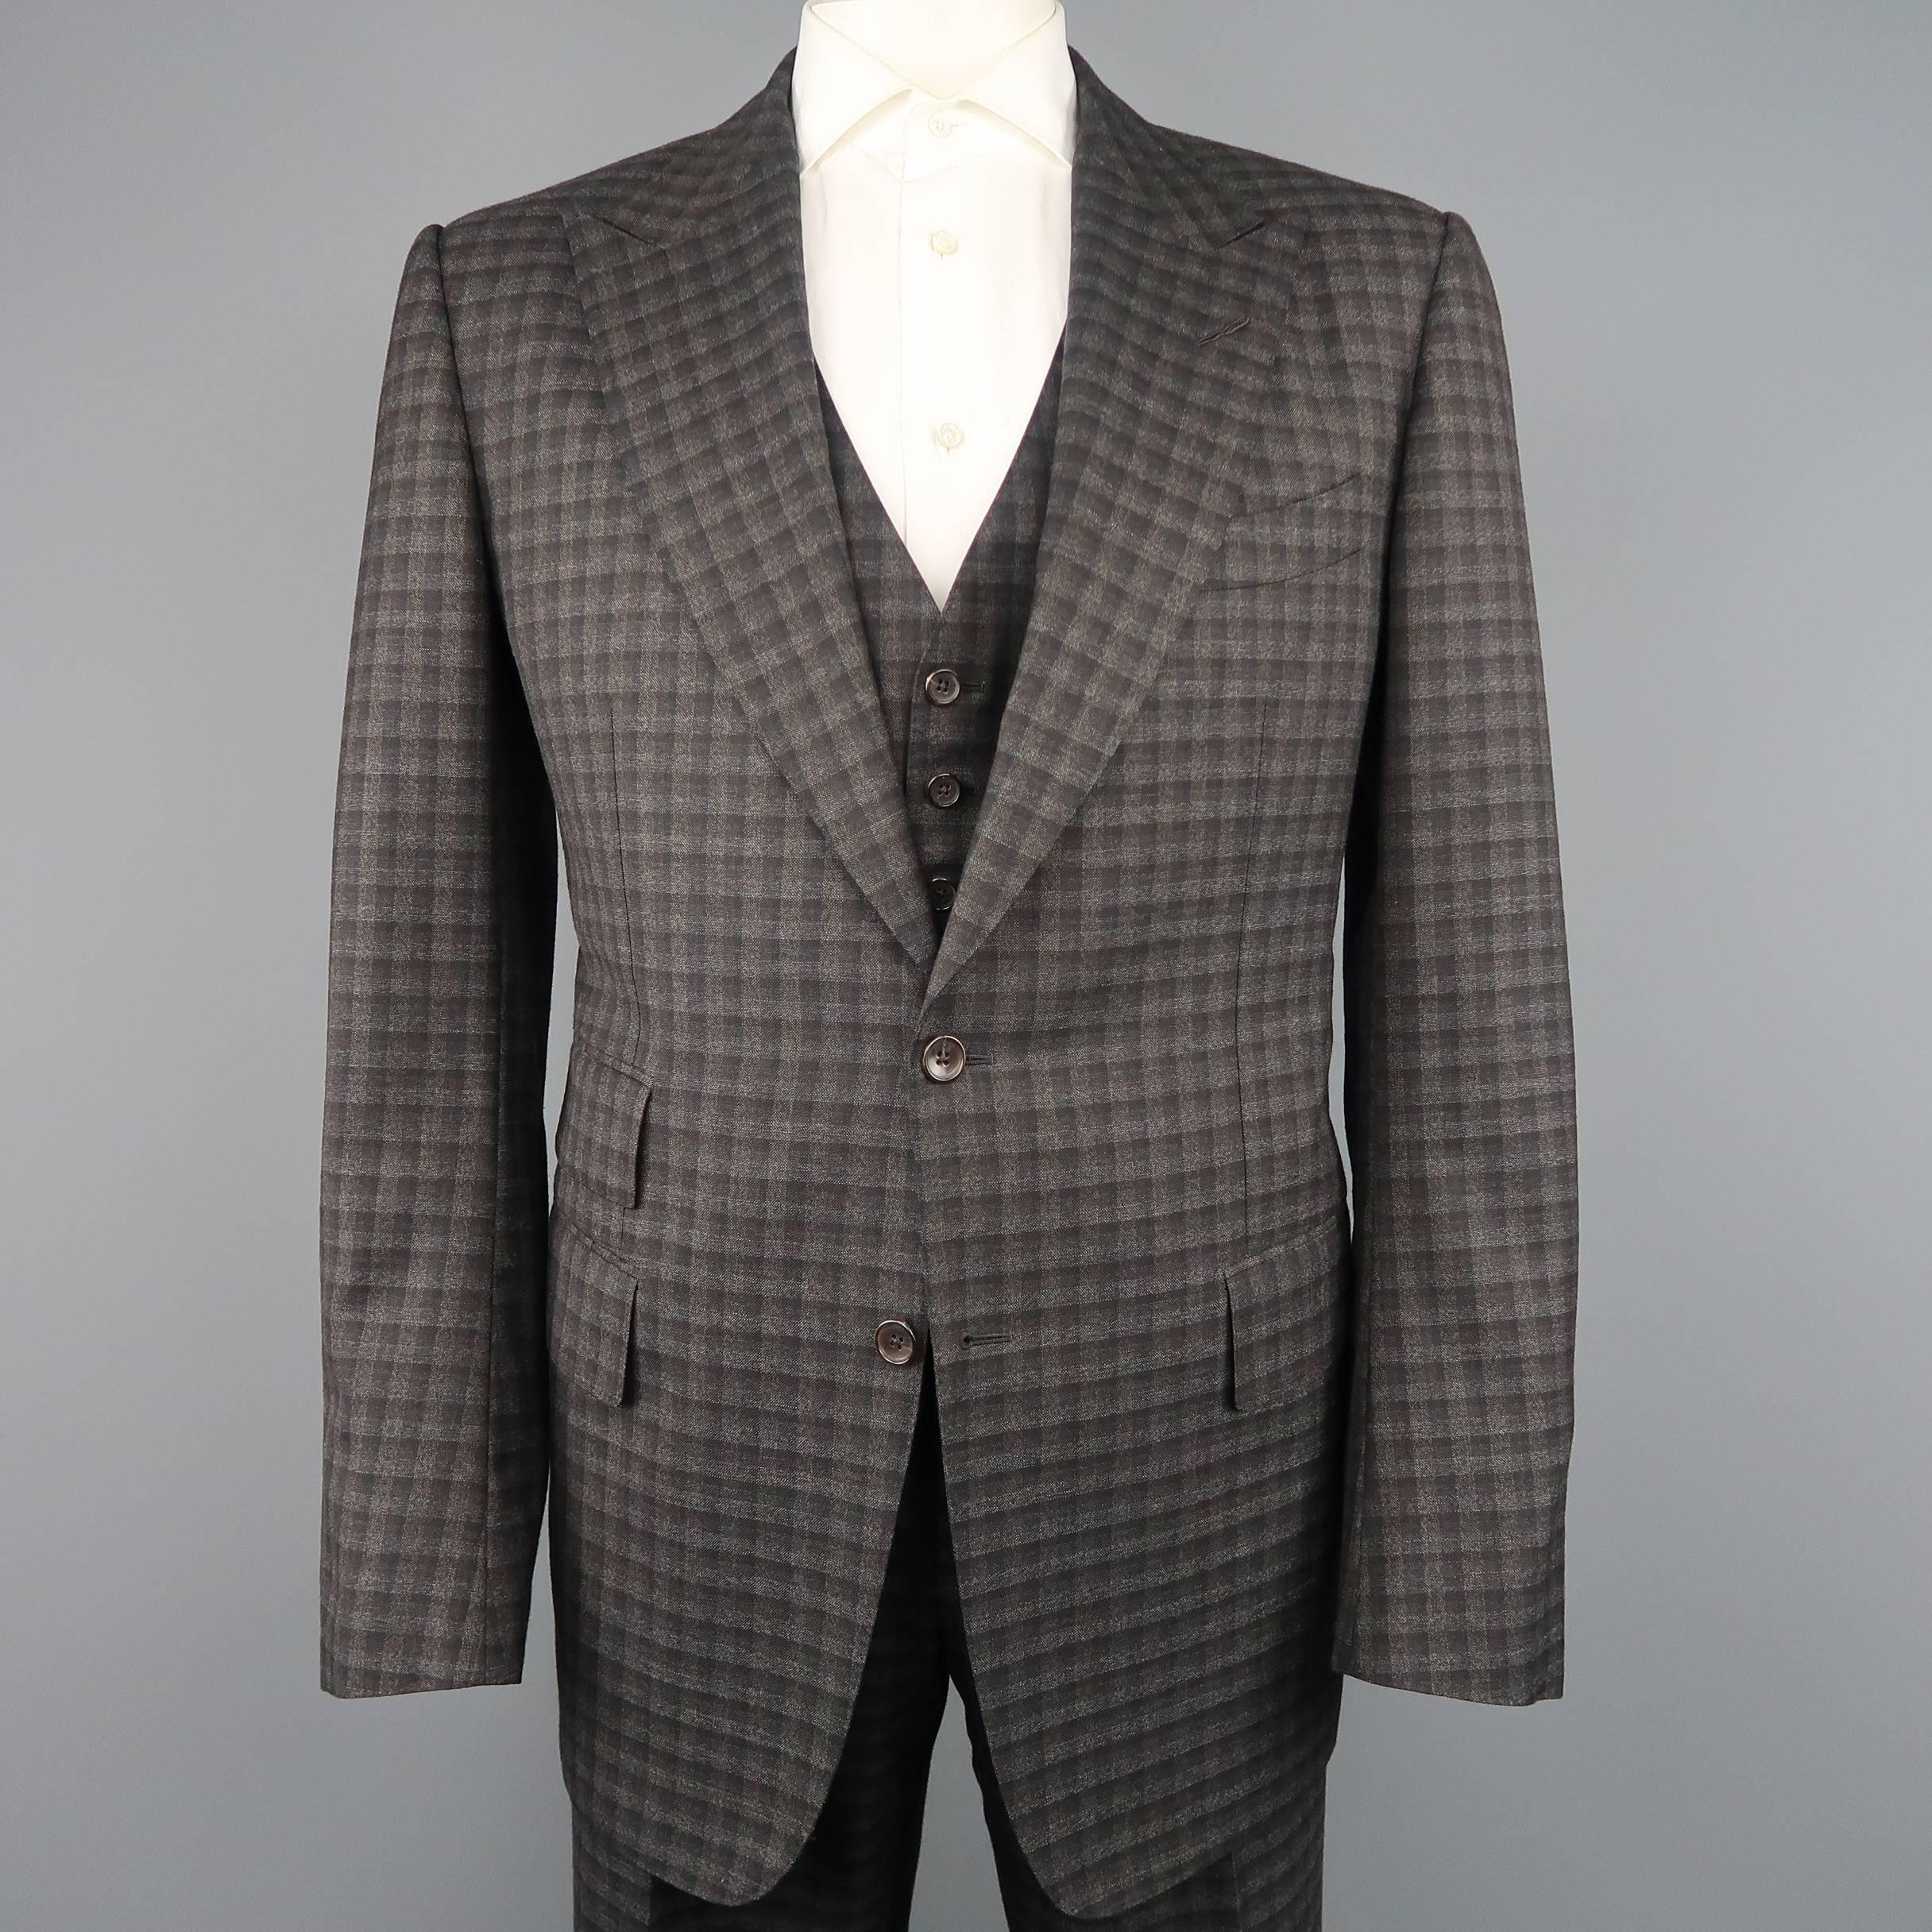 Three piece TOM FORD suit comes in charcoal and taupe checkered plaid wool and includes a single breasted, two button sport coat with wide peak lapel and functional button cuffs, V neck vest, and flat front, cuffed hem trousers with side tabs. Made